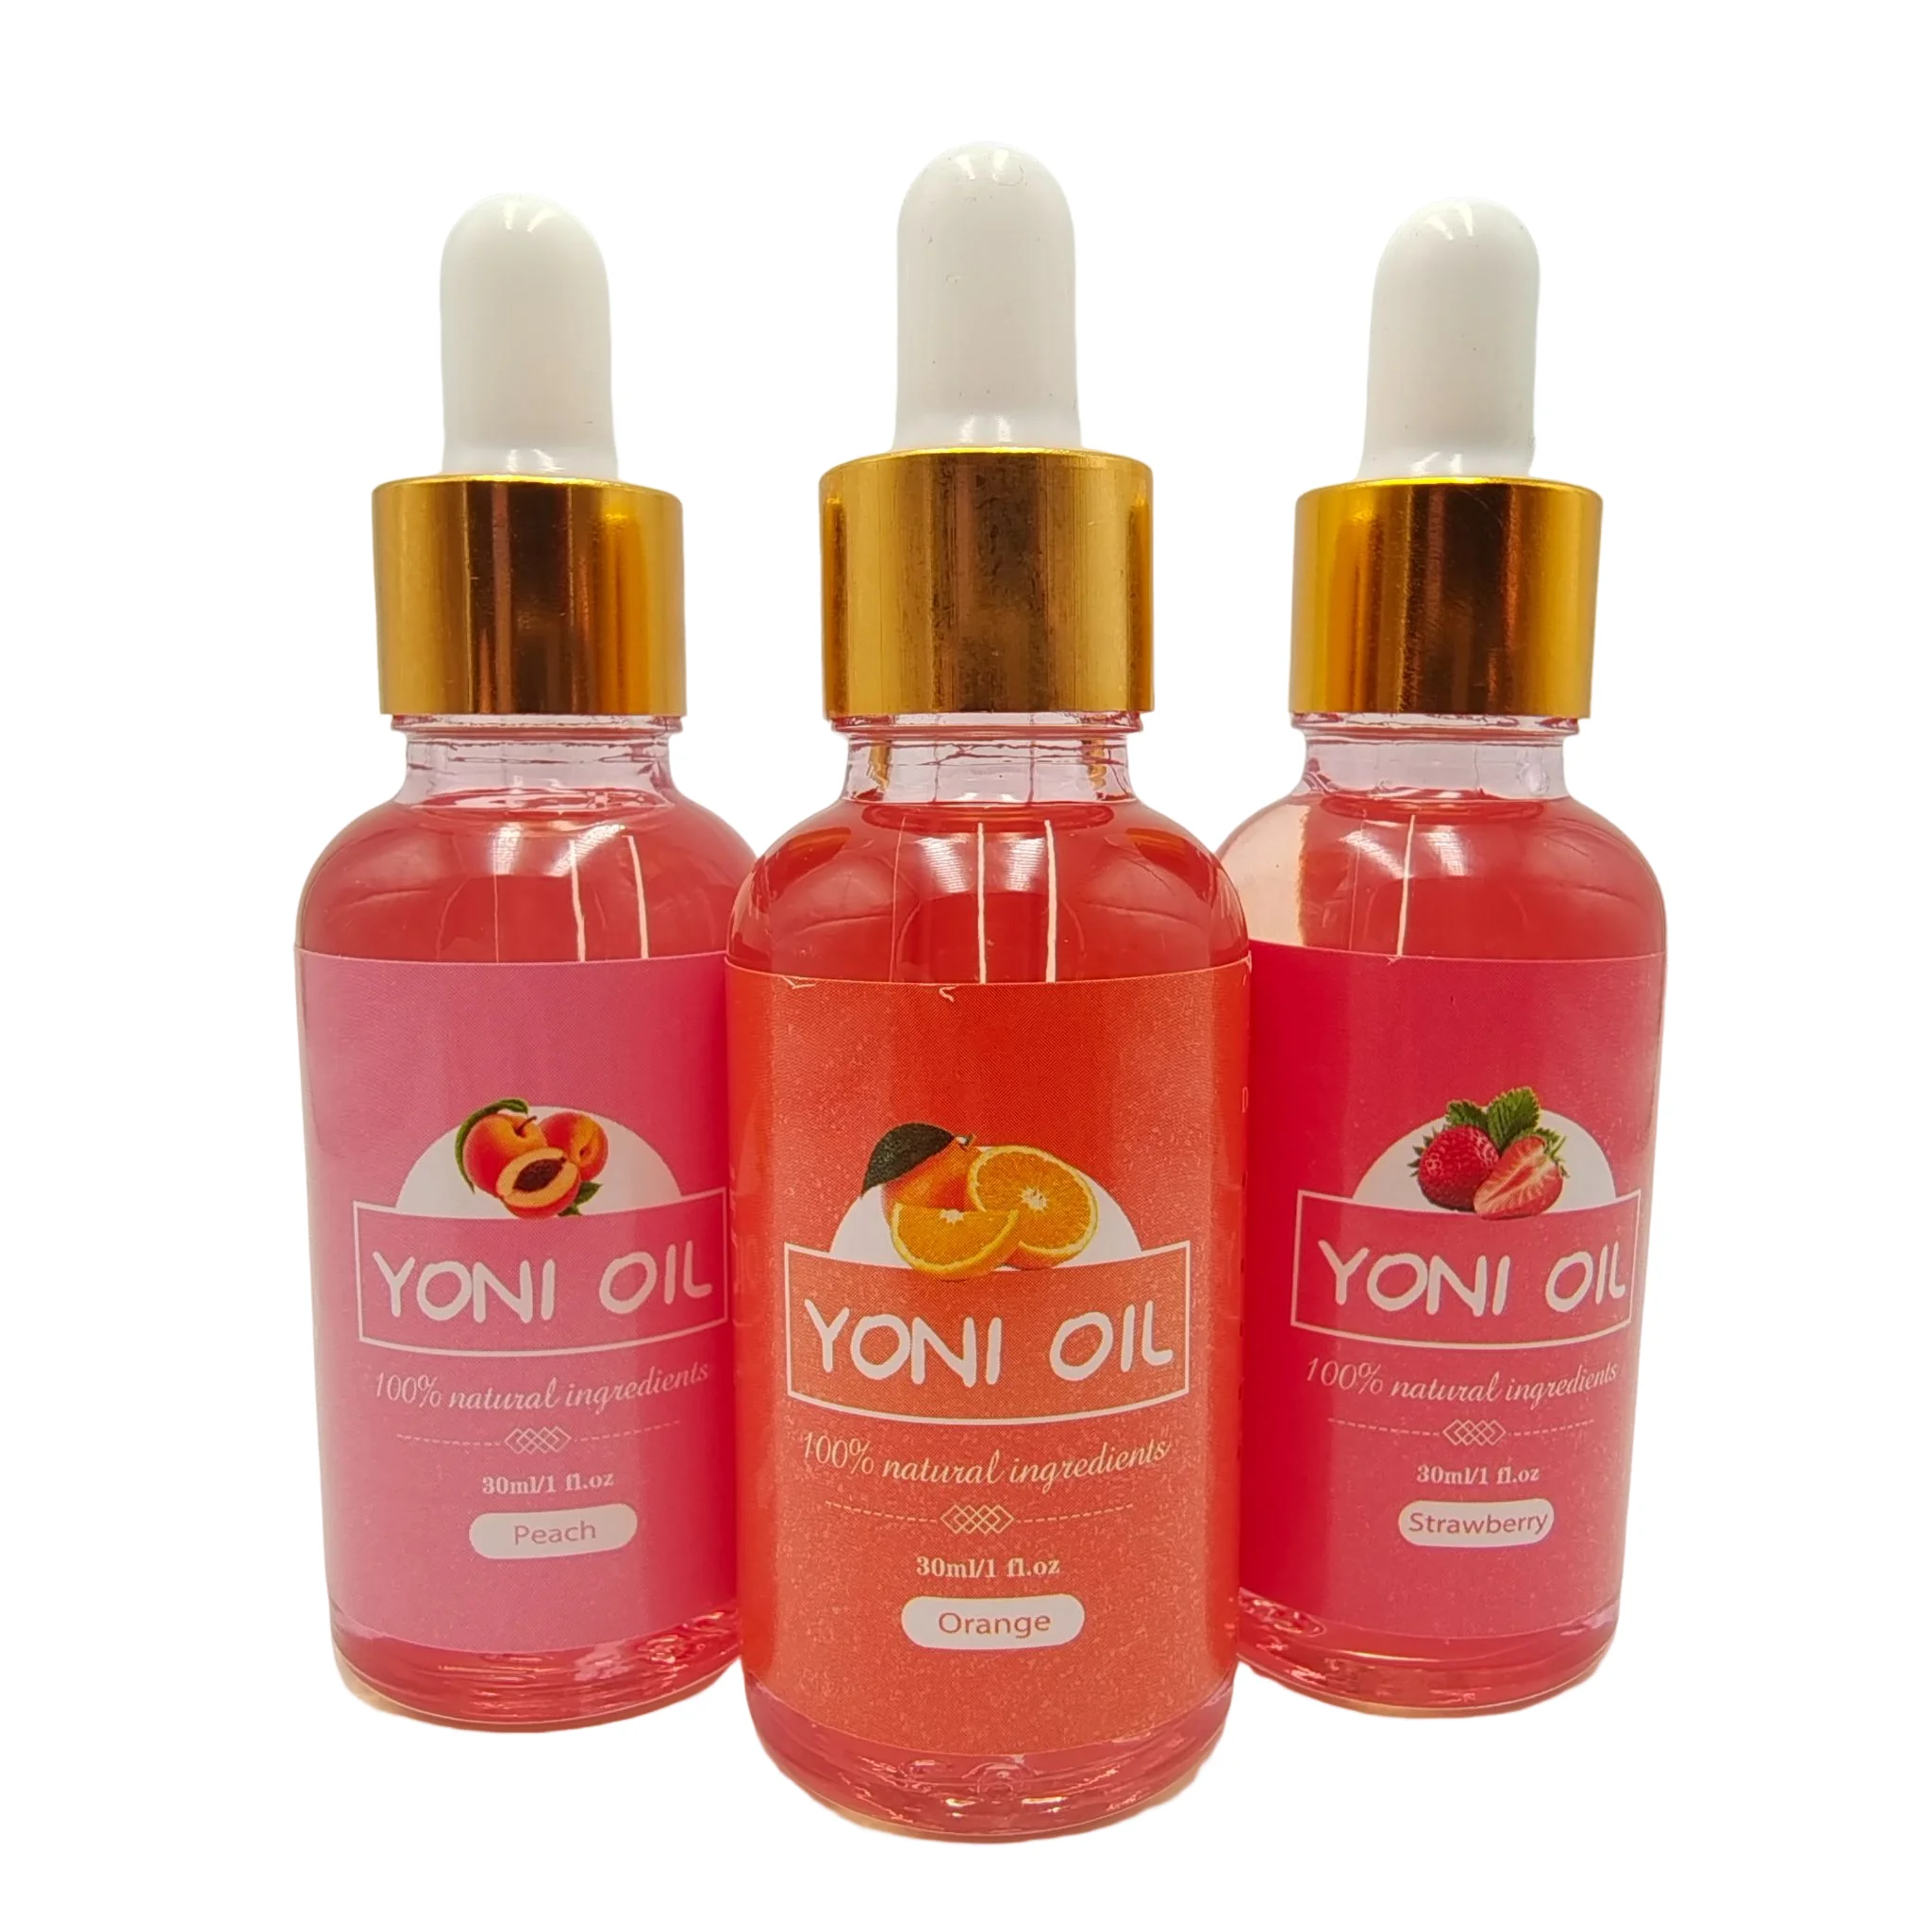 

Yoni Oil Vaginal Tightening Remove Odor Anti Itching Wholesale Yoni Essential Oil With High Quality And Low Price